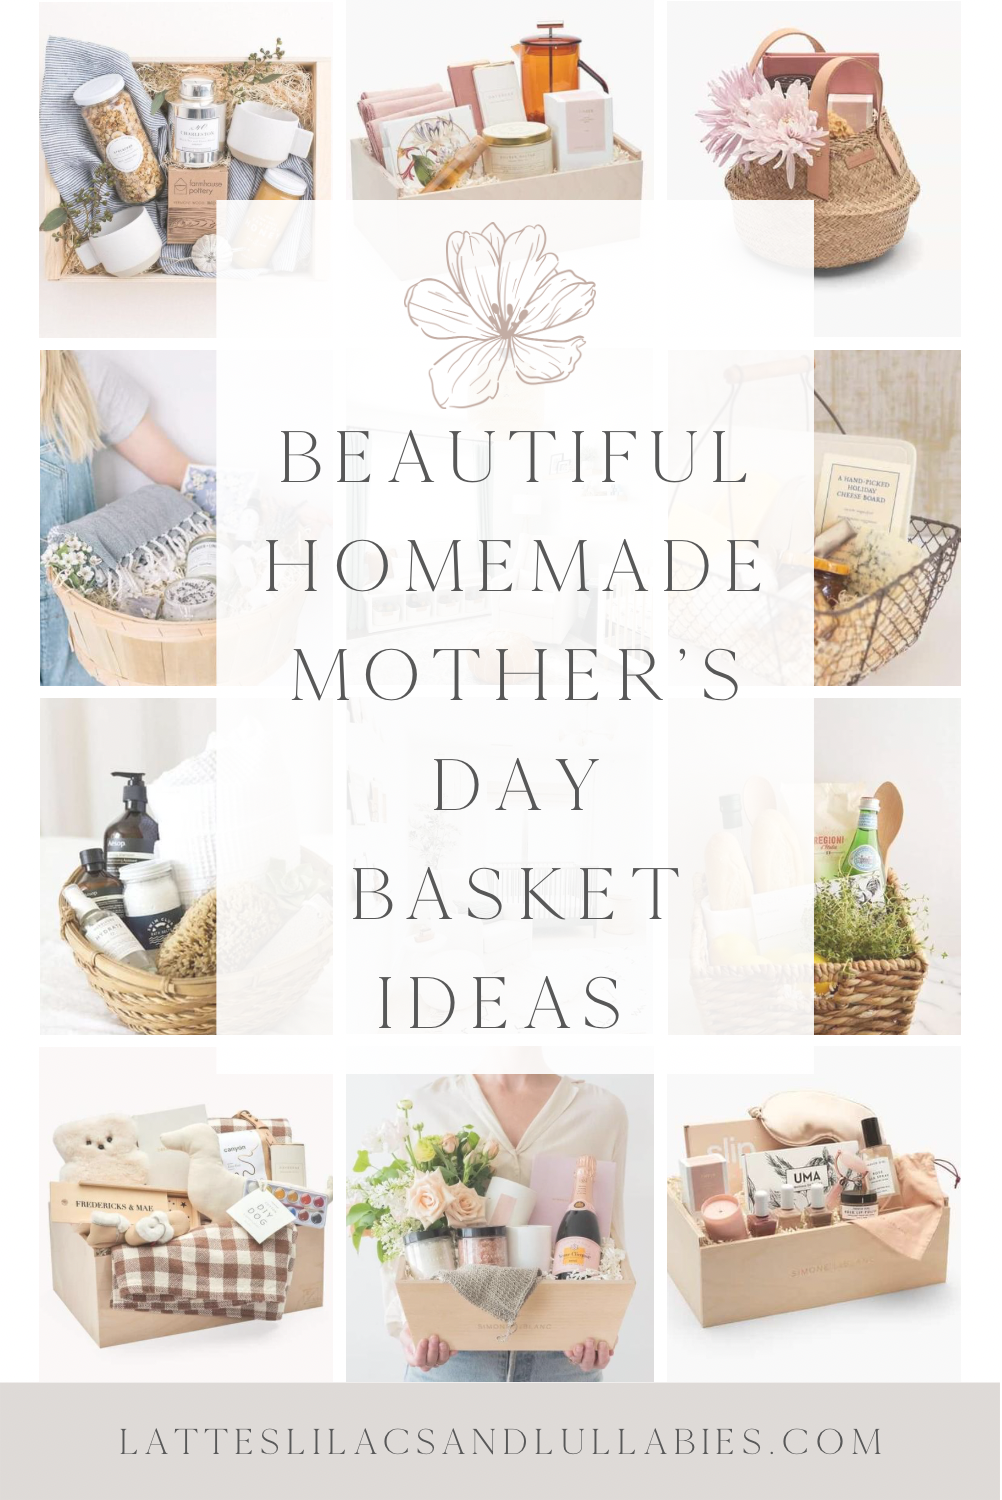 The Best Homemade Mother’s Day Gift Baskets